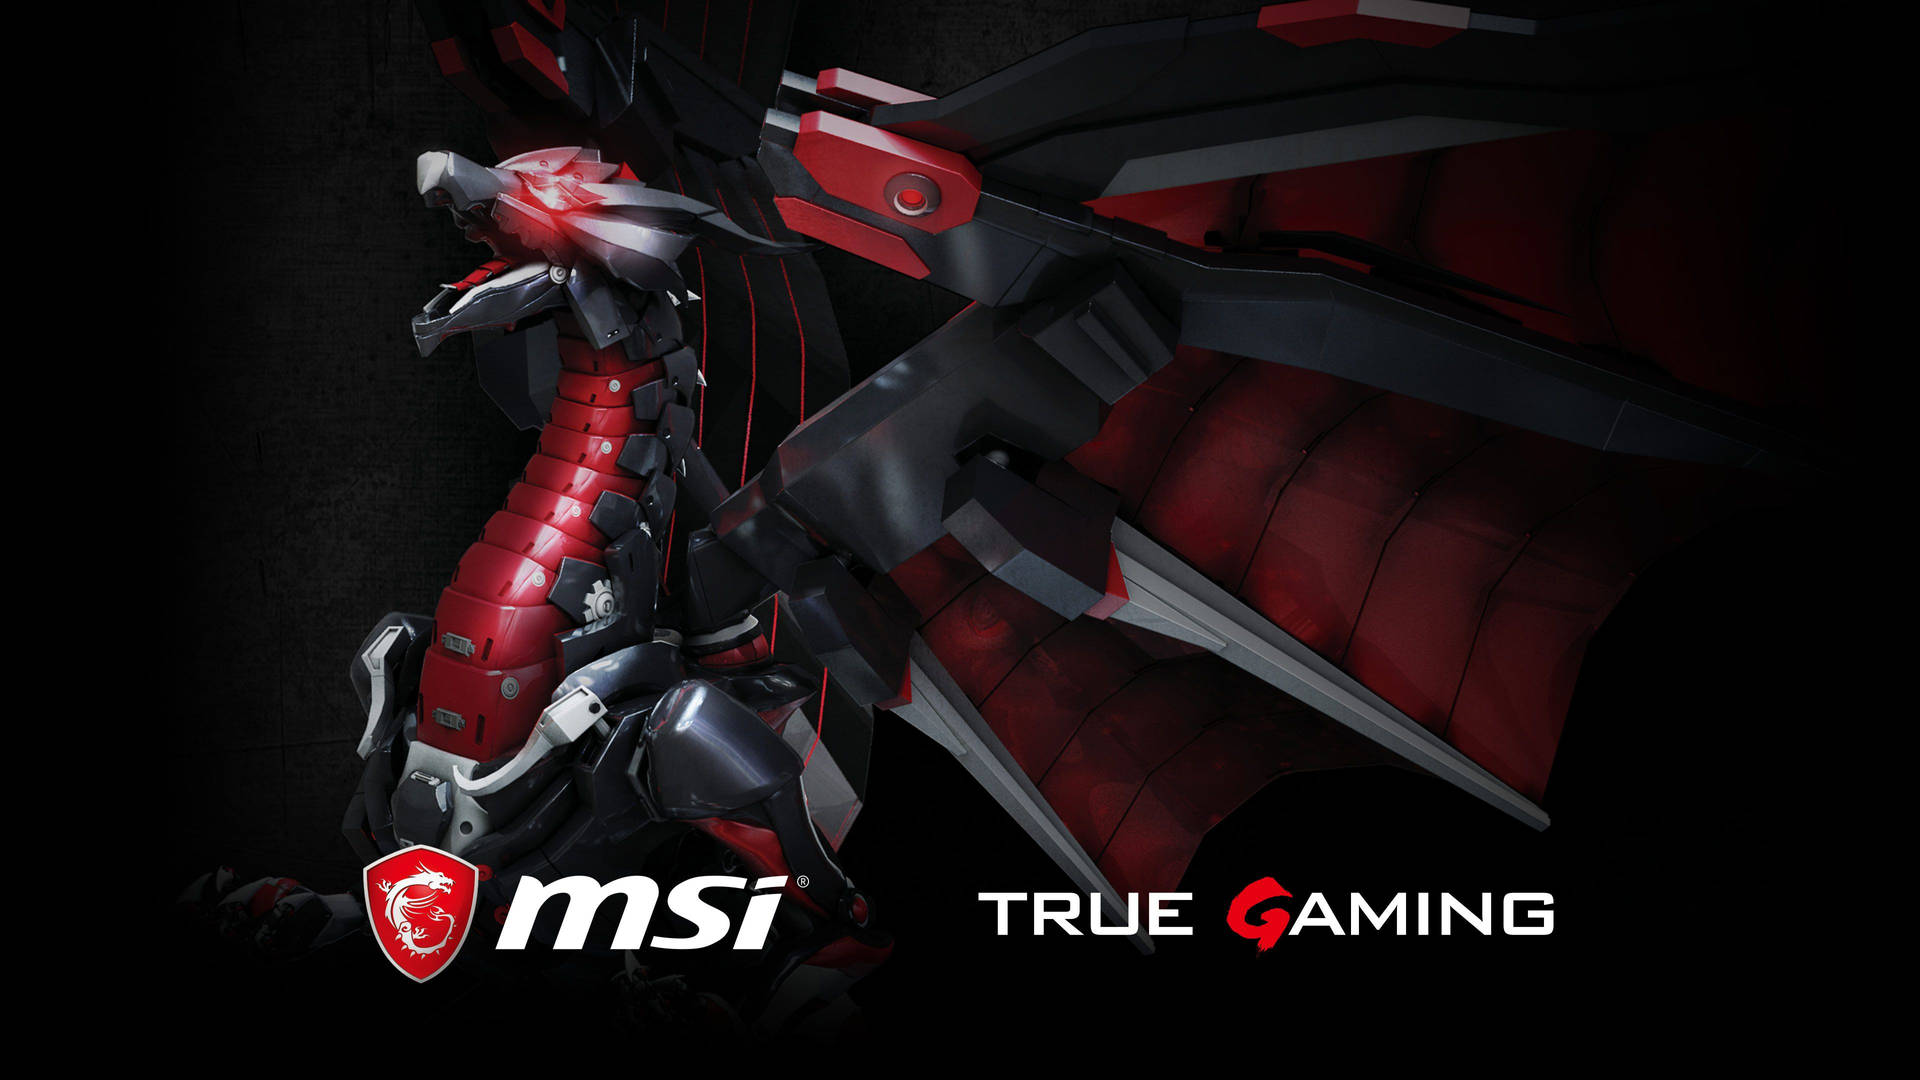 MSI True Gaming: a High Tech and Energetic Dragon Robot Wallpaper